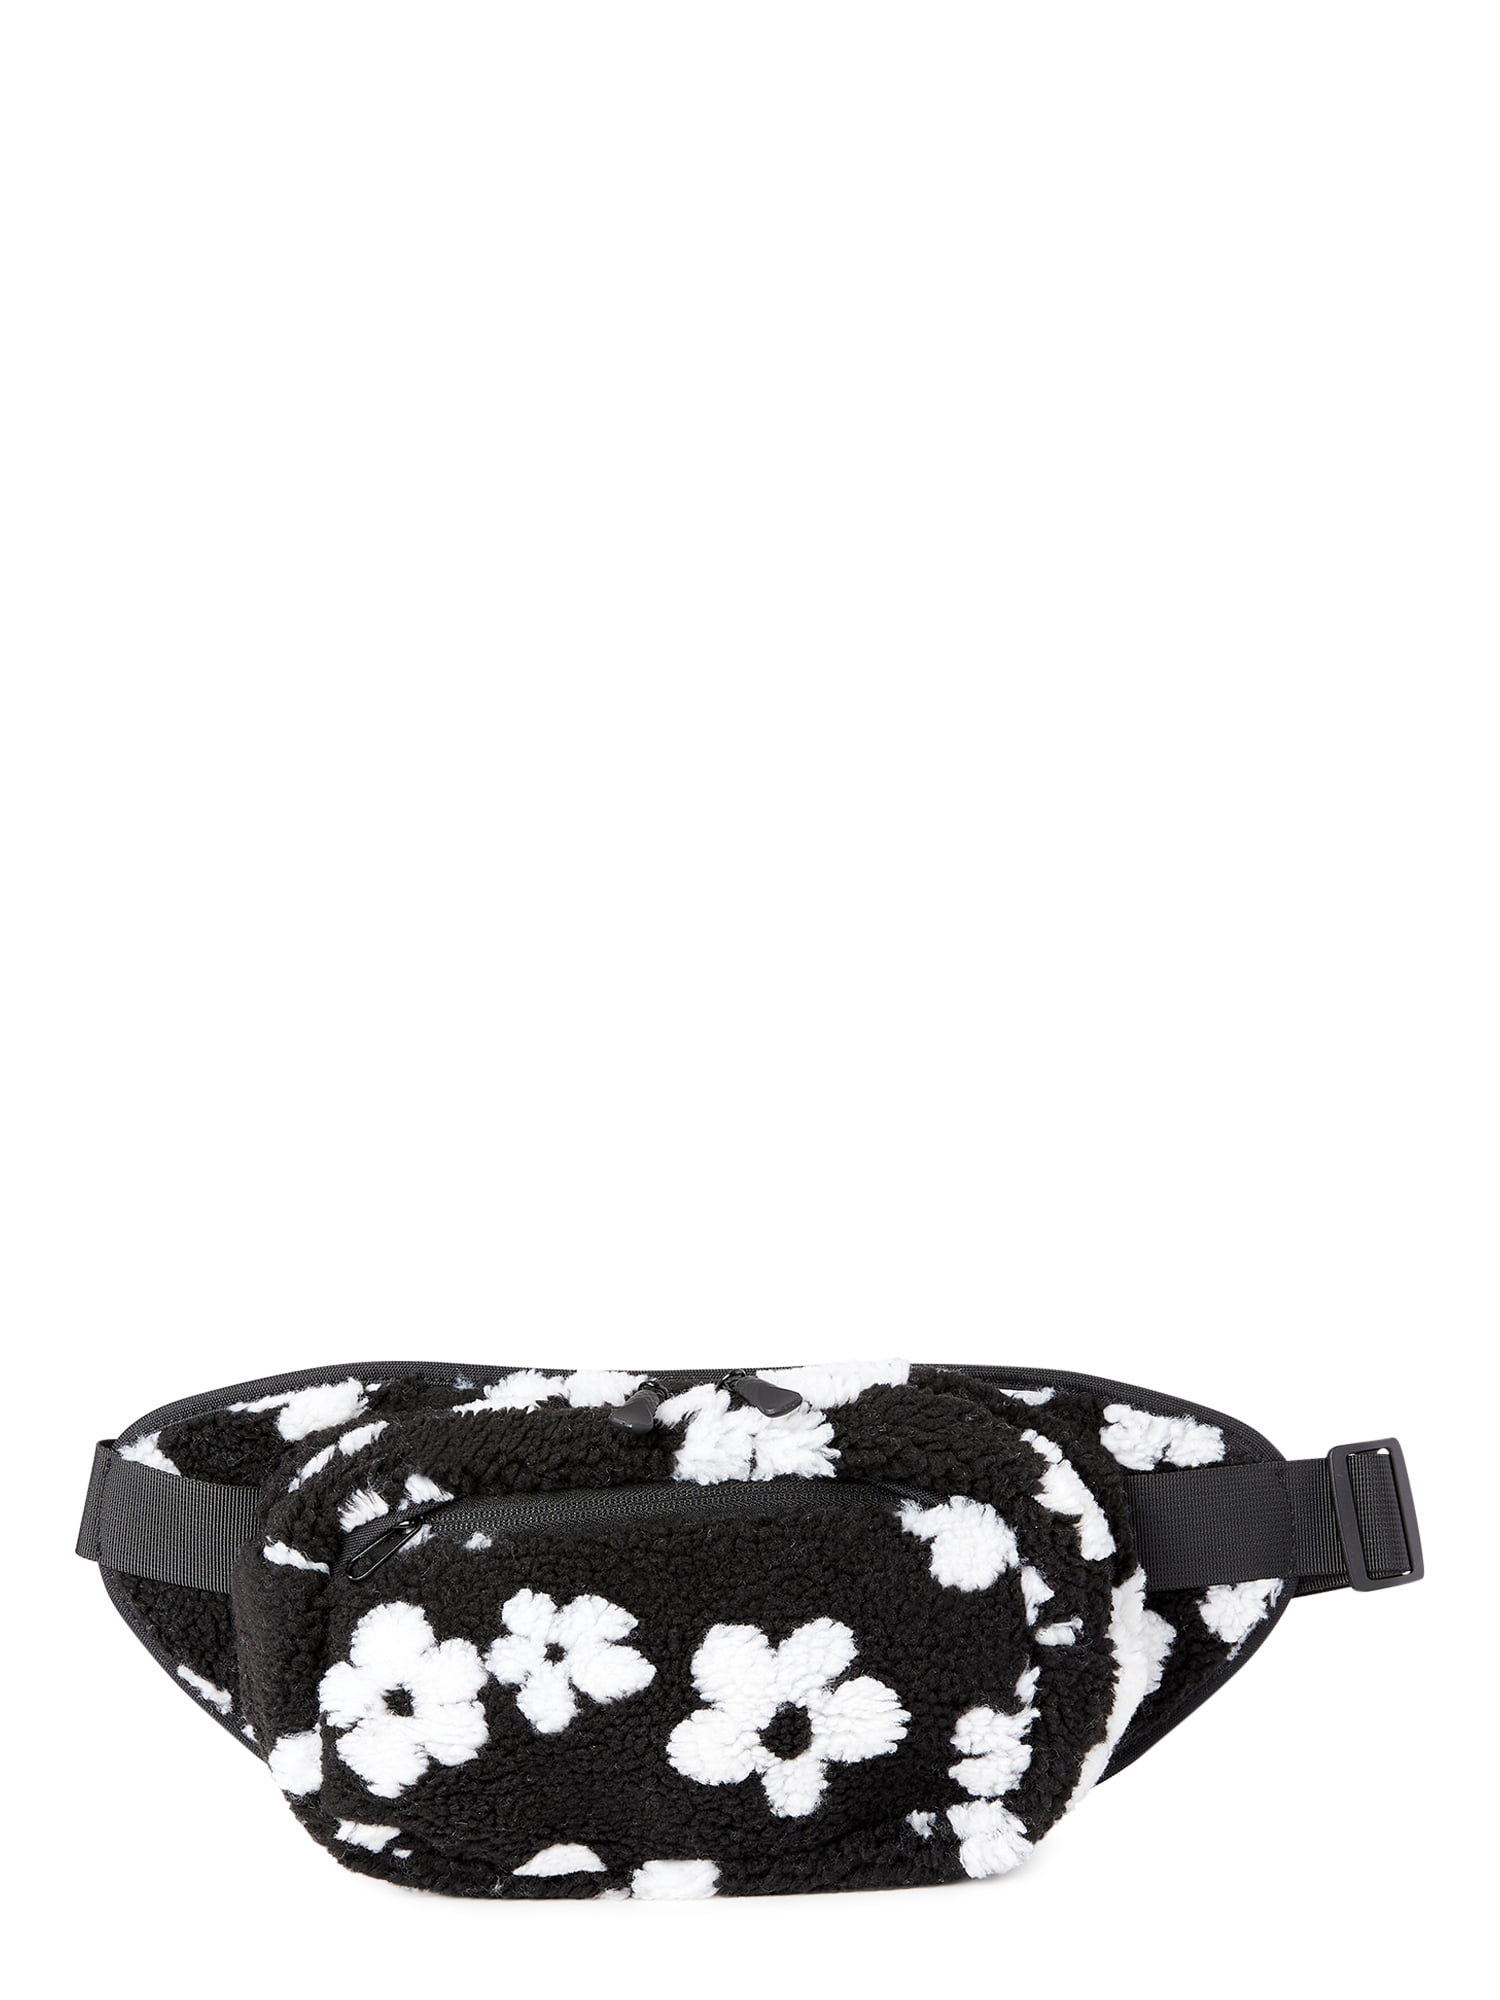 No Boundaries Women's Hands Free Rectangular Fanny Pack Black and White  Floral